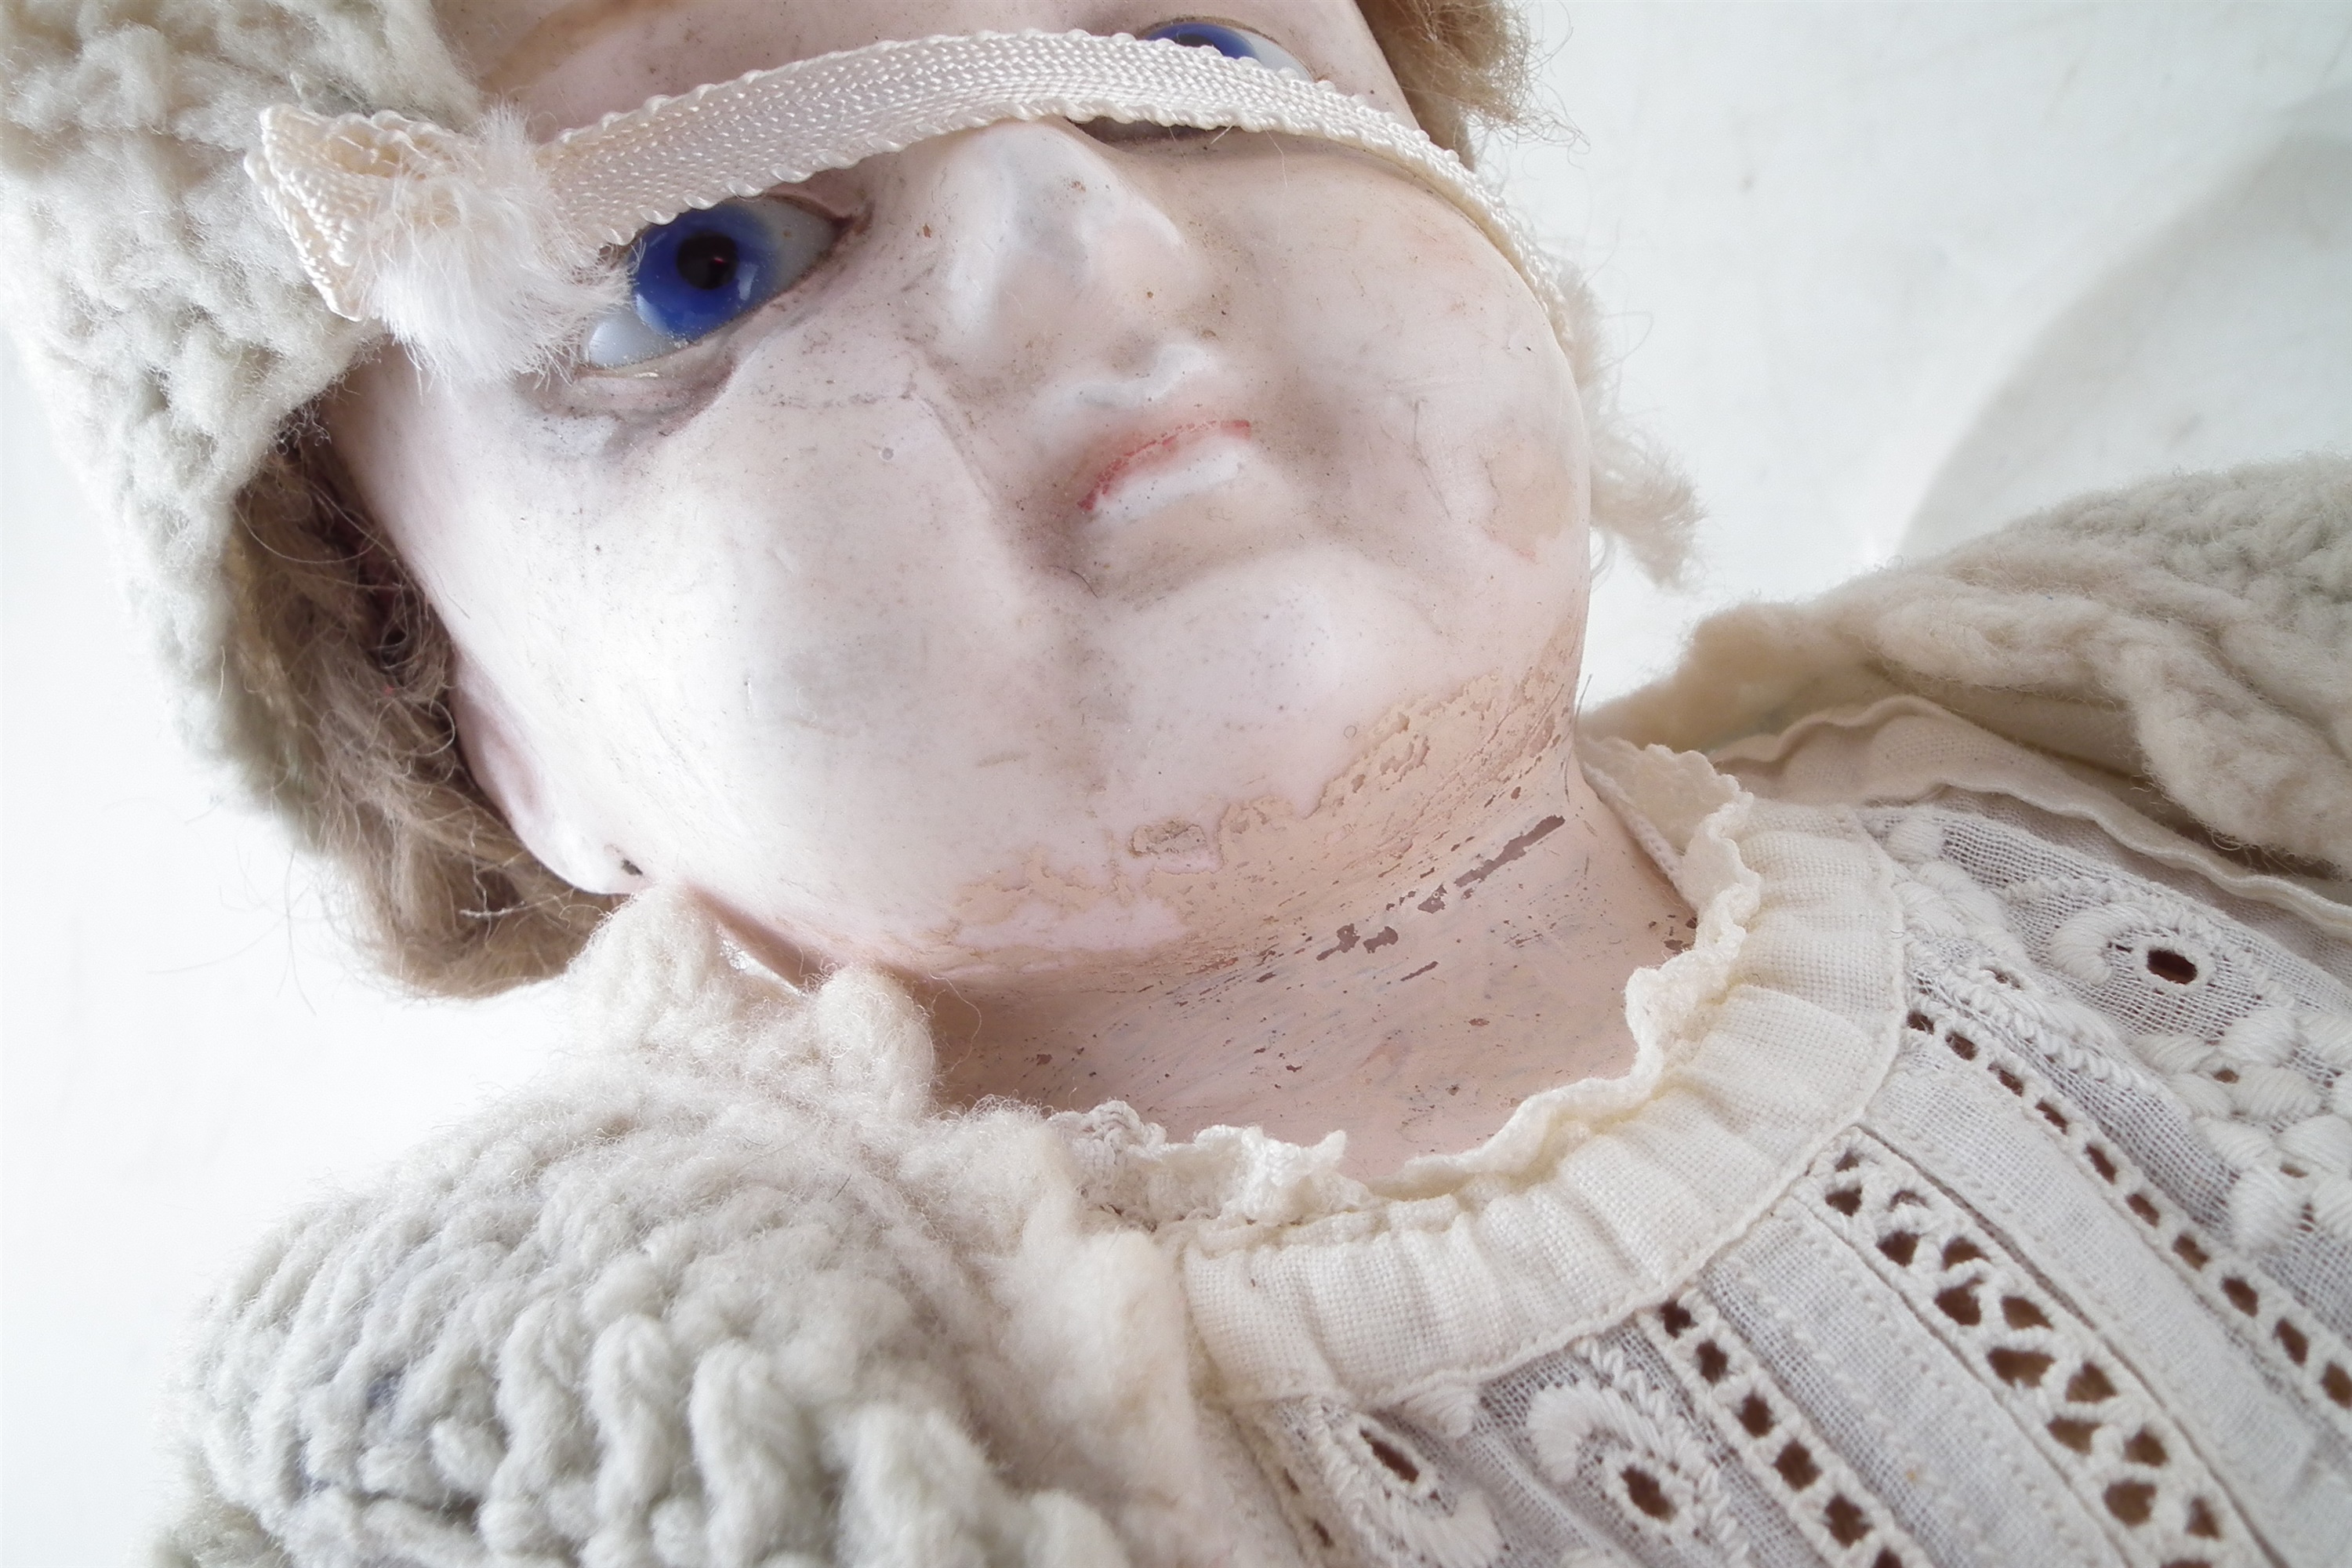 Victorian wax doll, with blue eyes dressed in knitted clothes 50cm high - Image 5 of 9